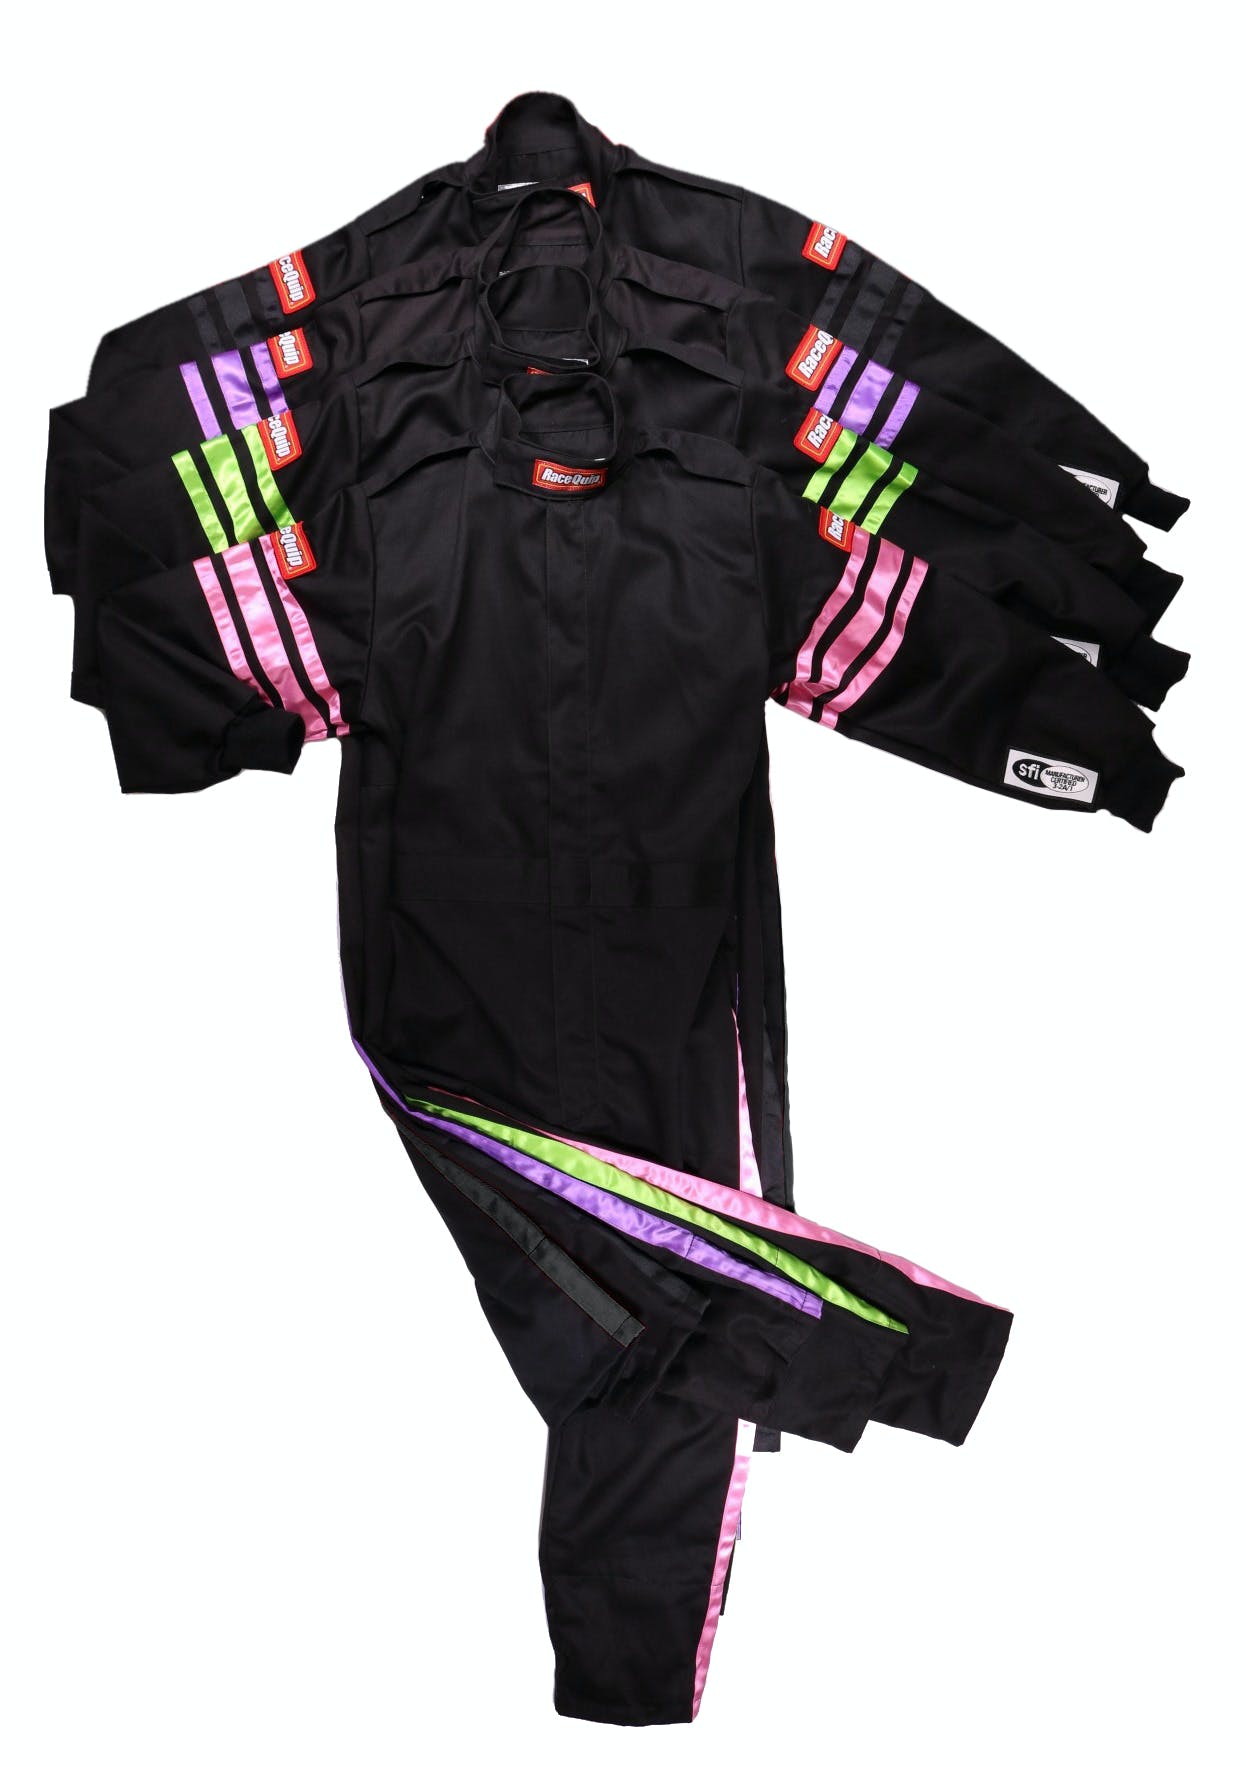 RaceQuip 1950591 SFI-1 Pyrovatex One-Piece Single-Layer Youth Racing Fire Suit (Black/Purple-XS)